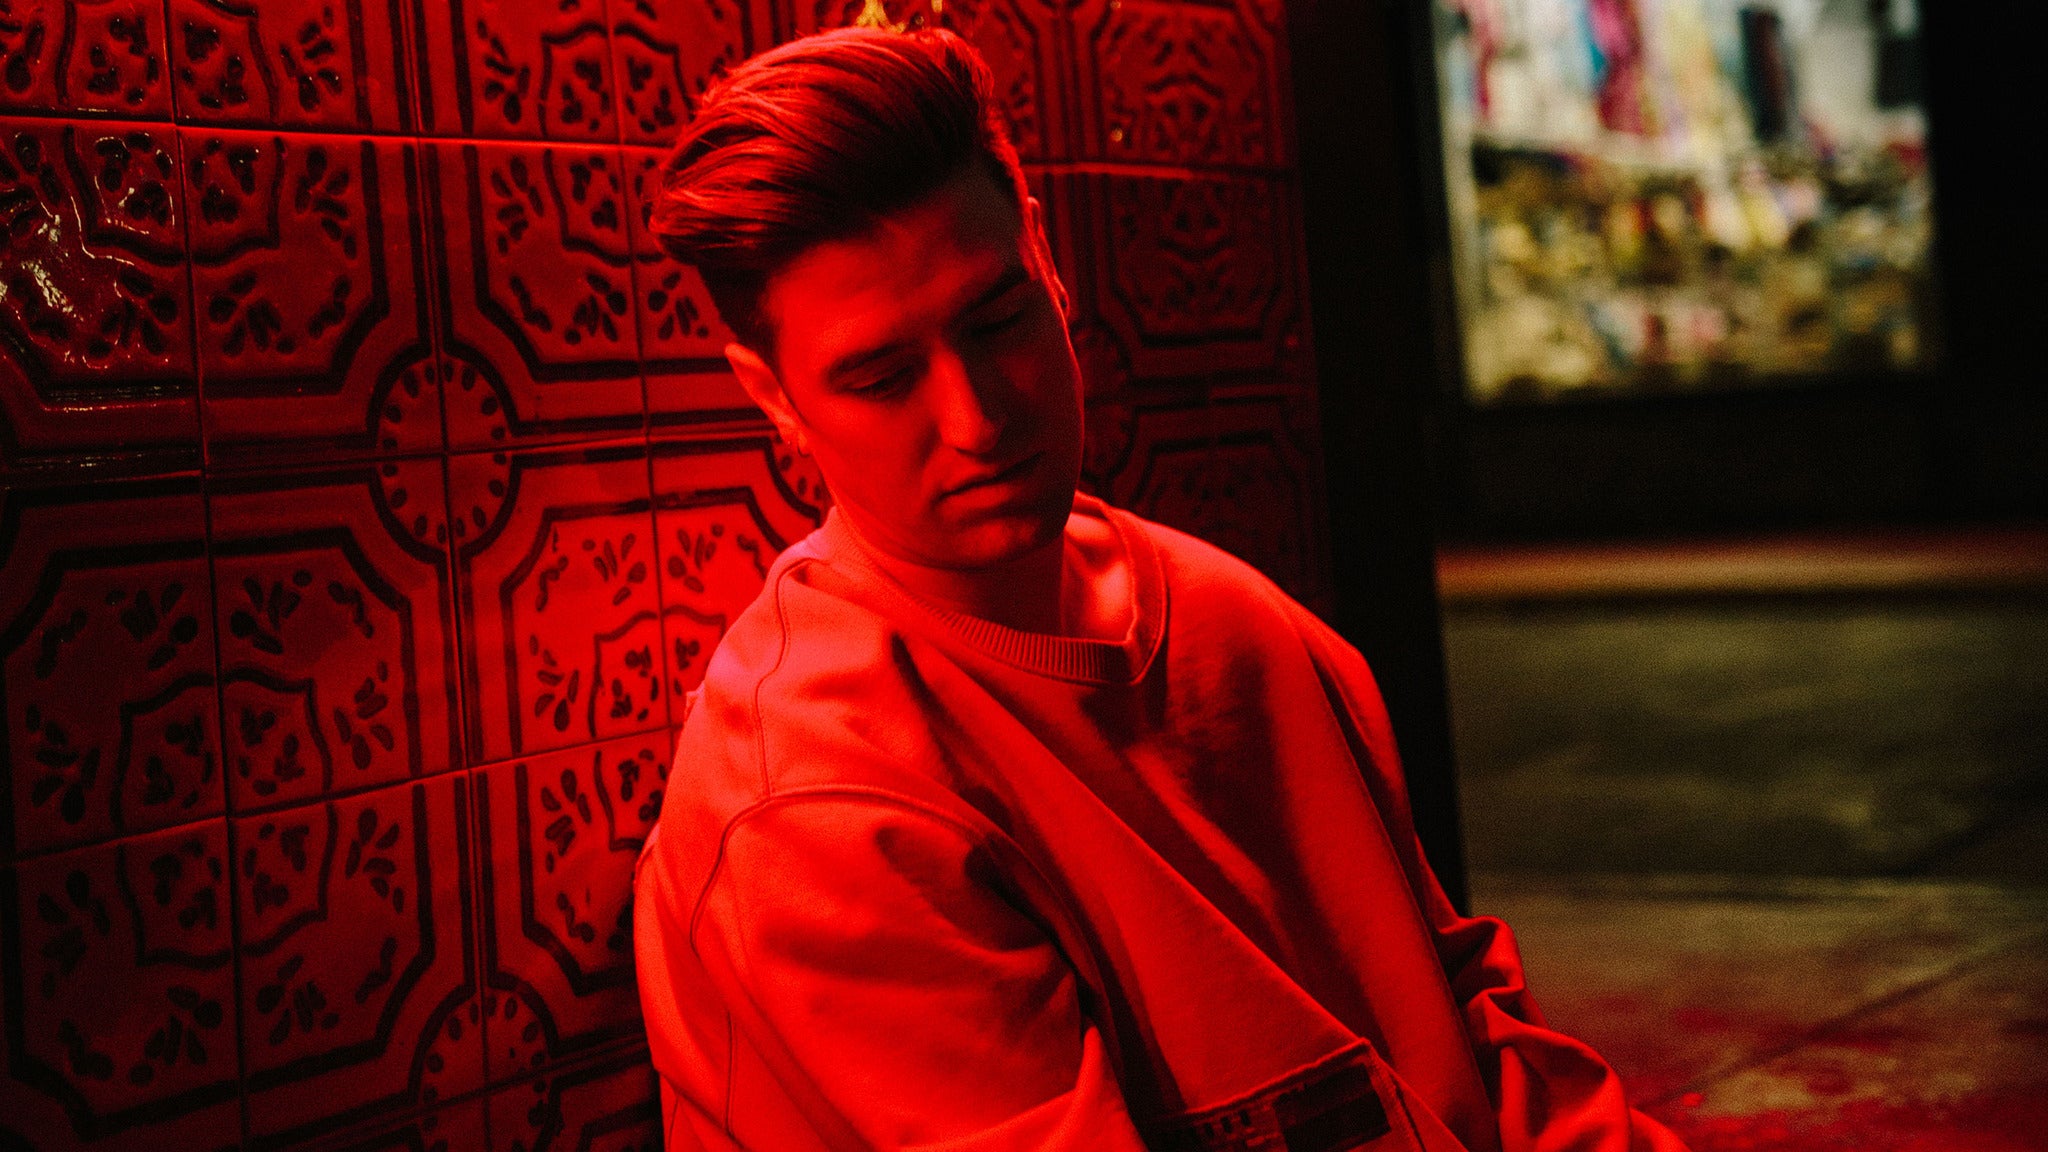 Logan Henderson in San Diego promo photo for Live Nation presale offer code